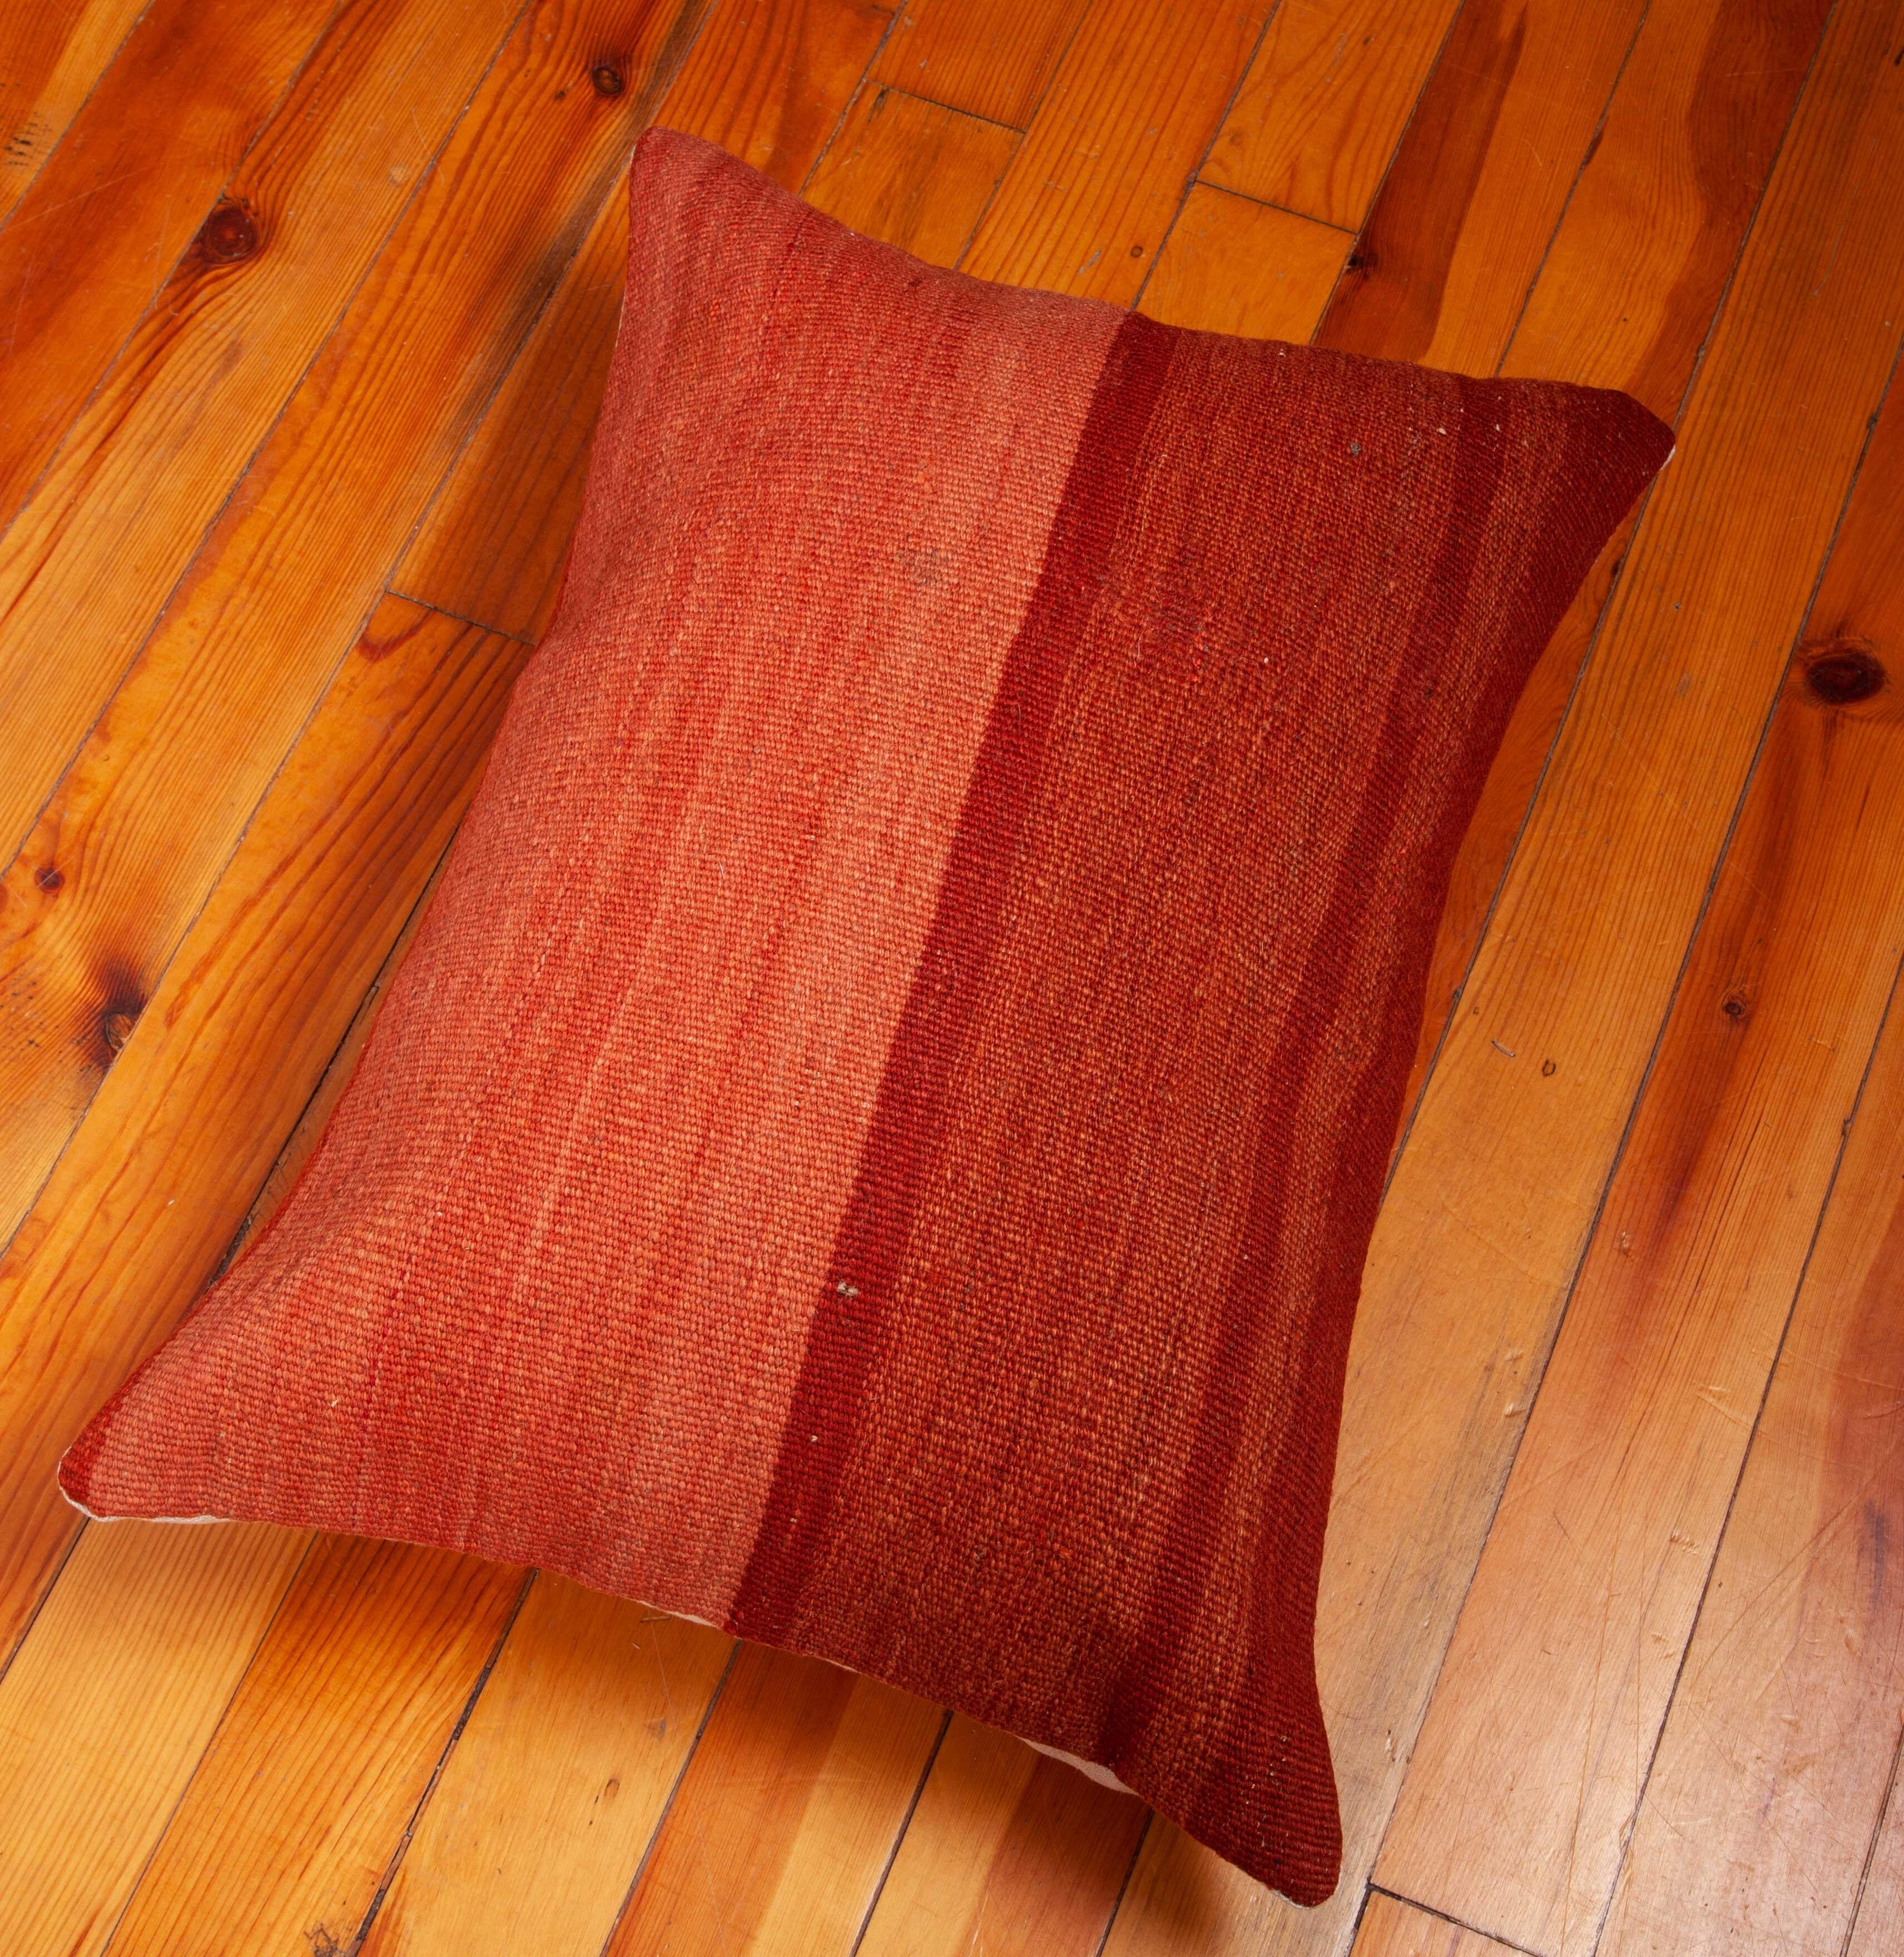 19th Century Pillow Case Fashioned from a Late 19th-Early 20th Century, Minimalist Kilim